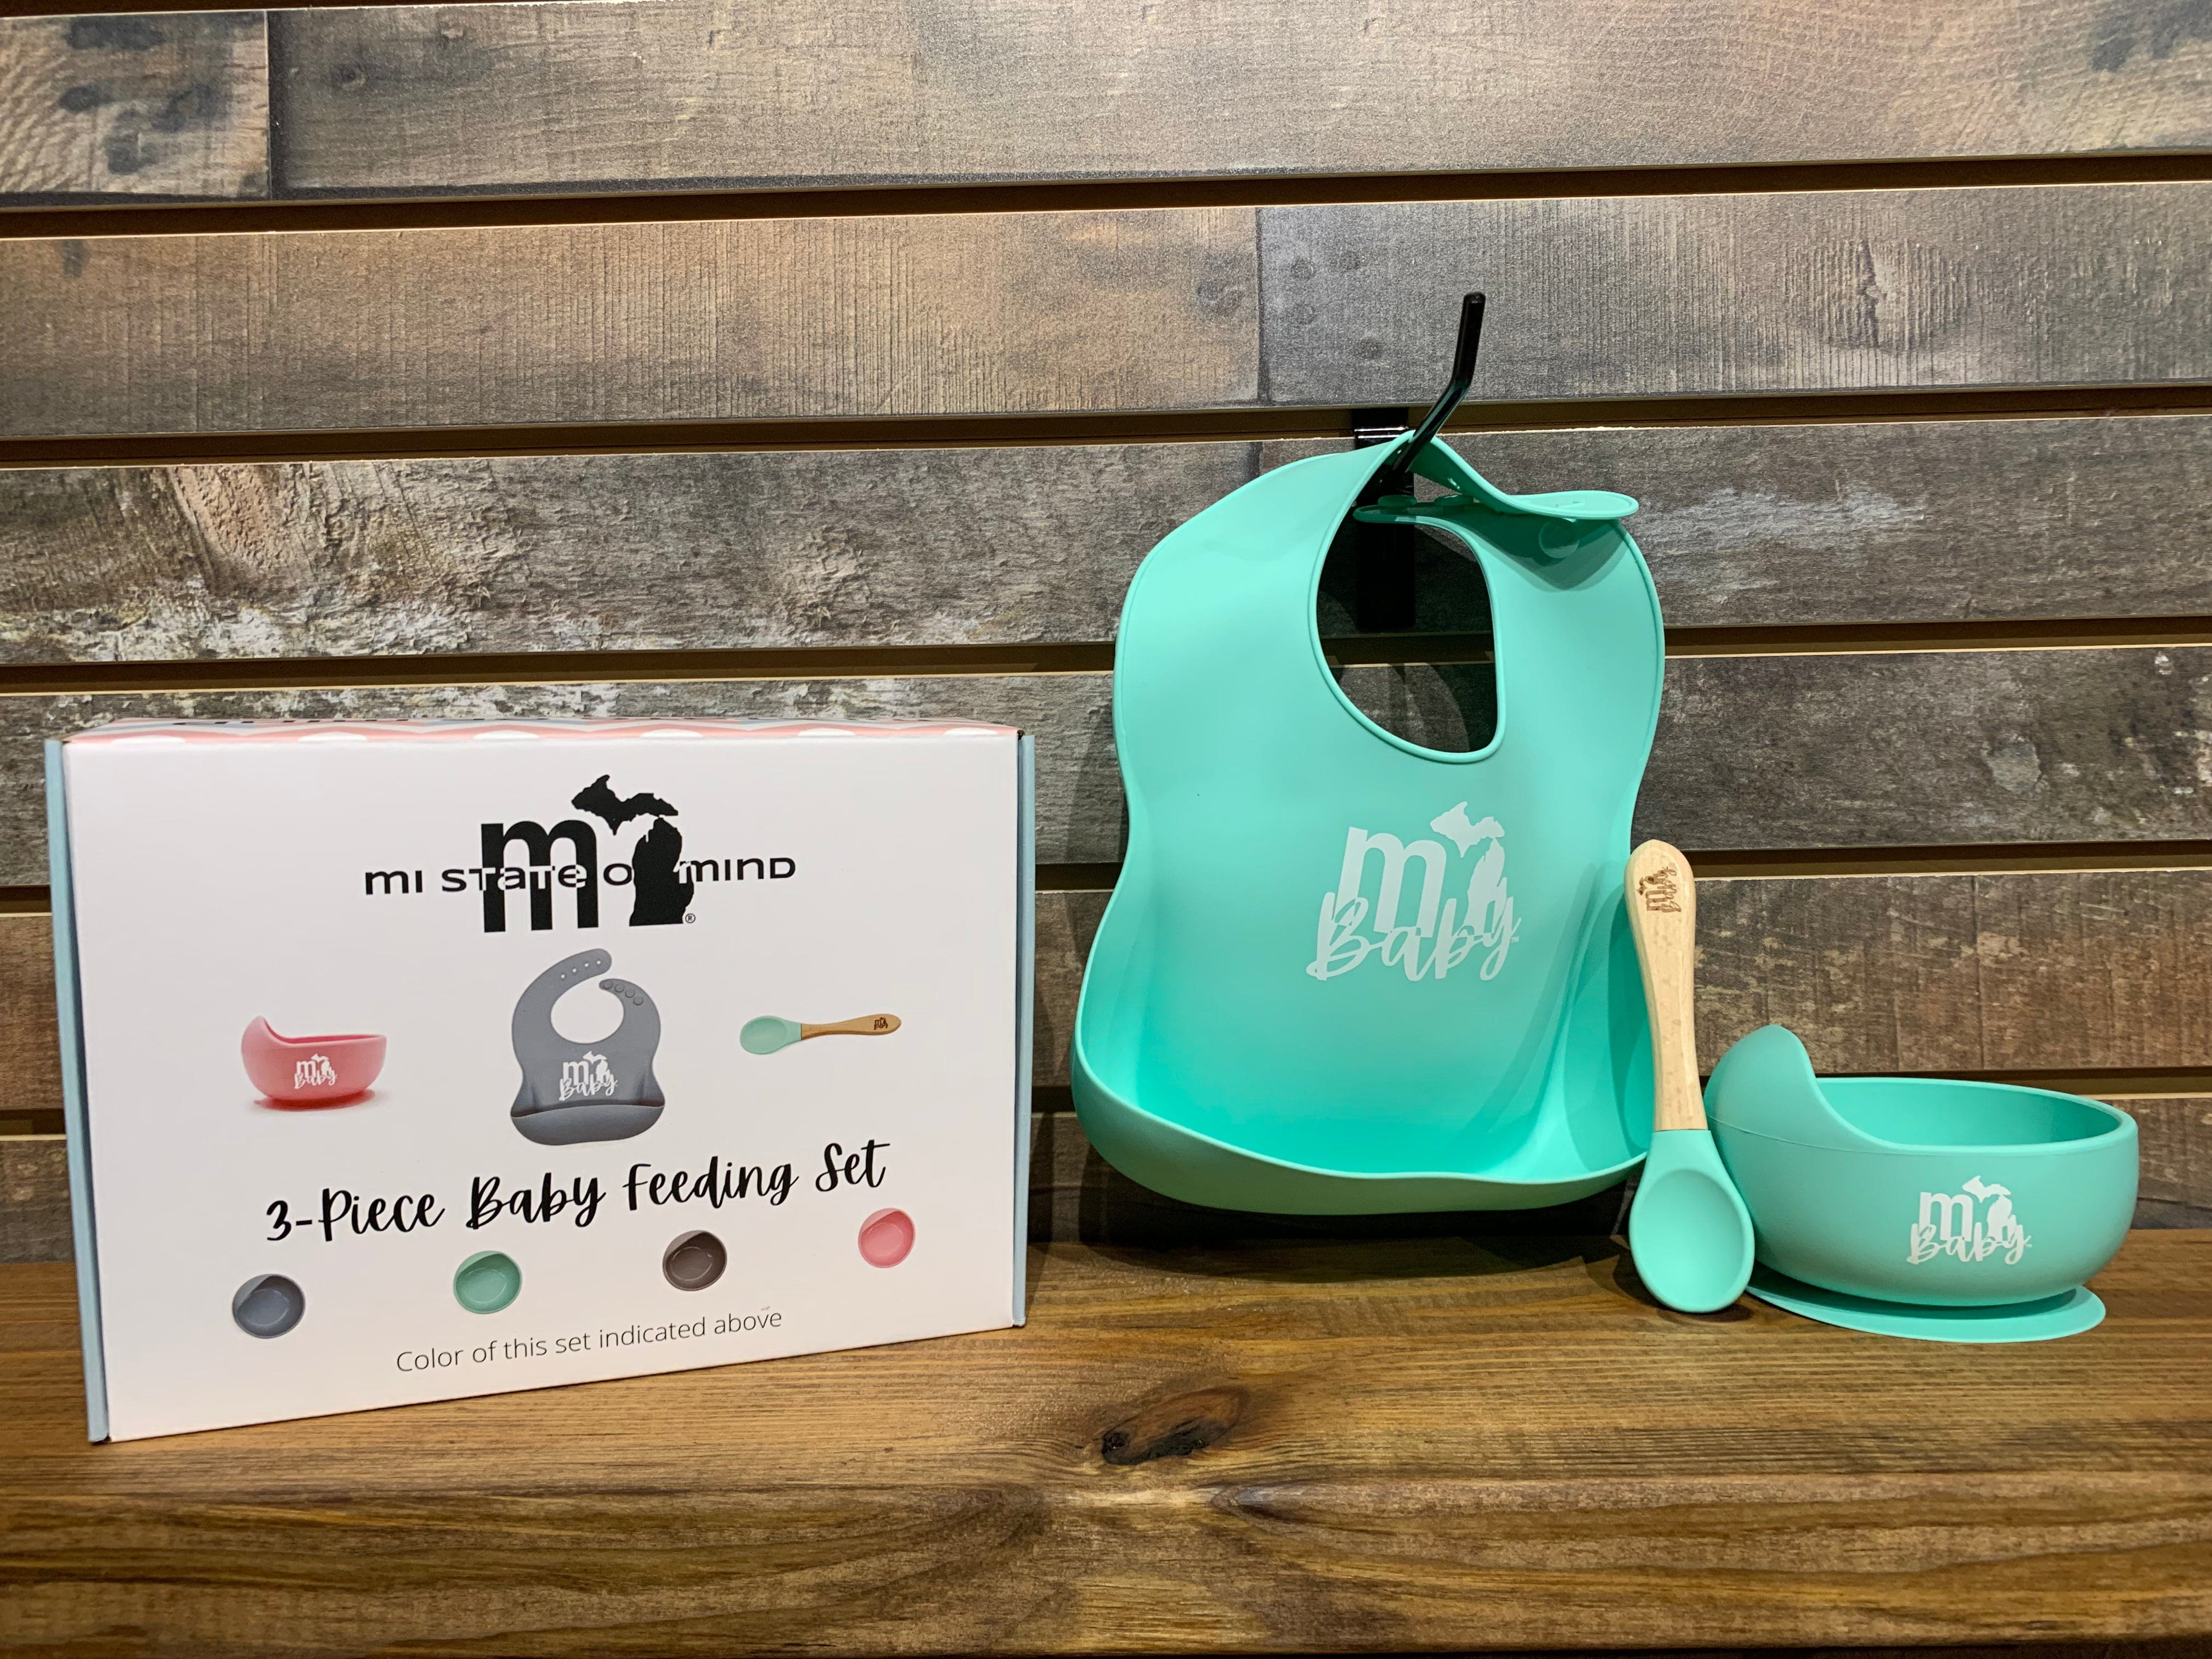 http://mistateofmind.com/cdn/shop/products/mi-state-of-mind-baby-gift-sets-mi-baby-3-piece-silicone-feeding-set-4-colors-37020778856663.jpg?v=1651528049